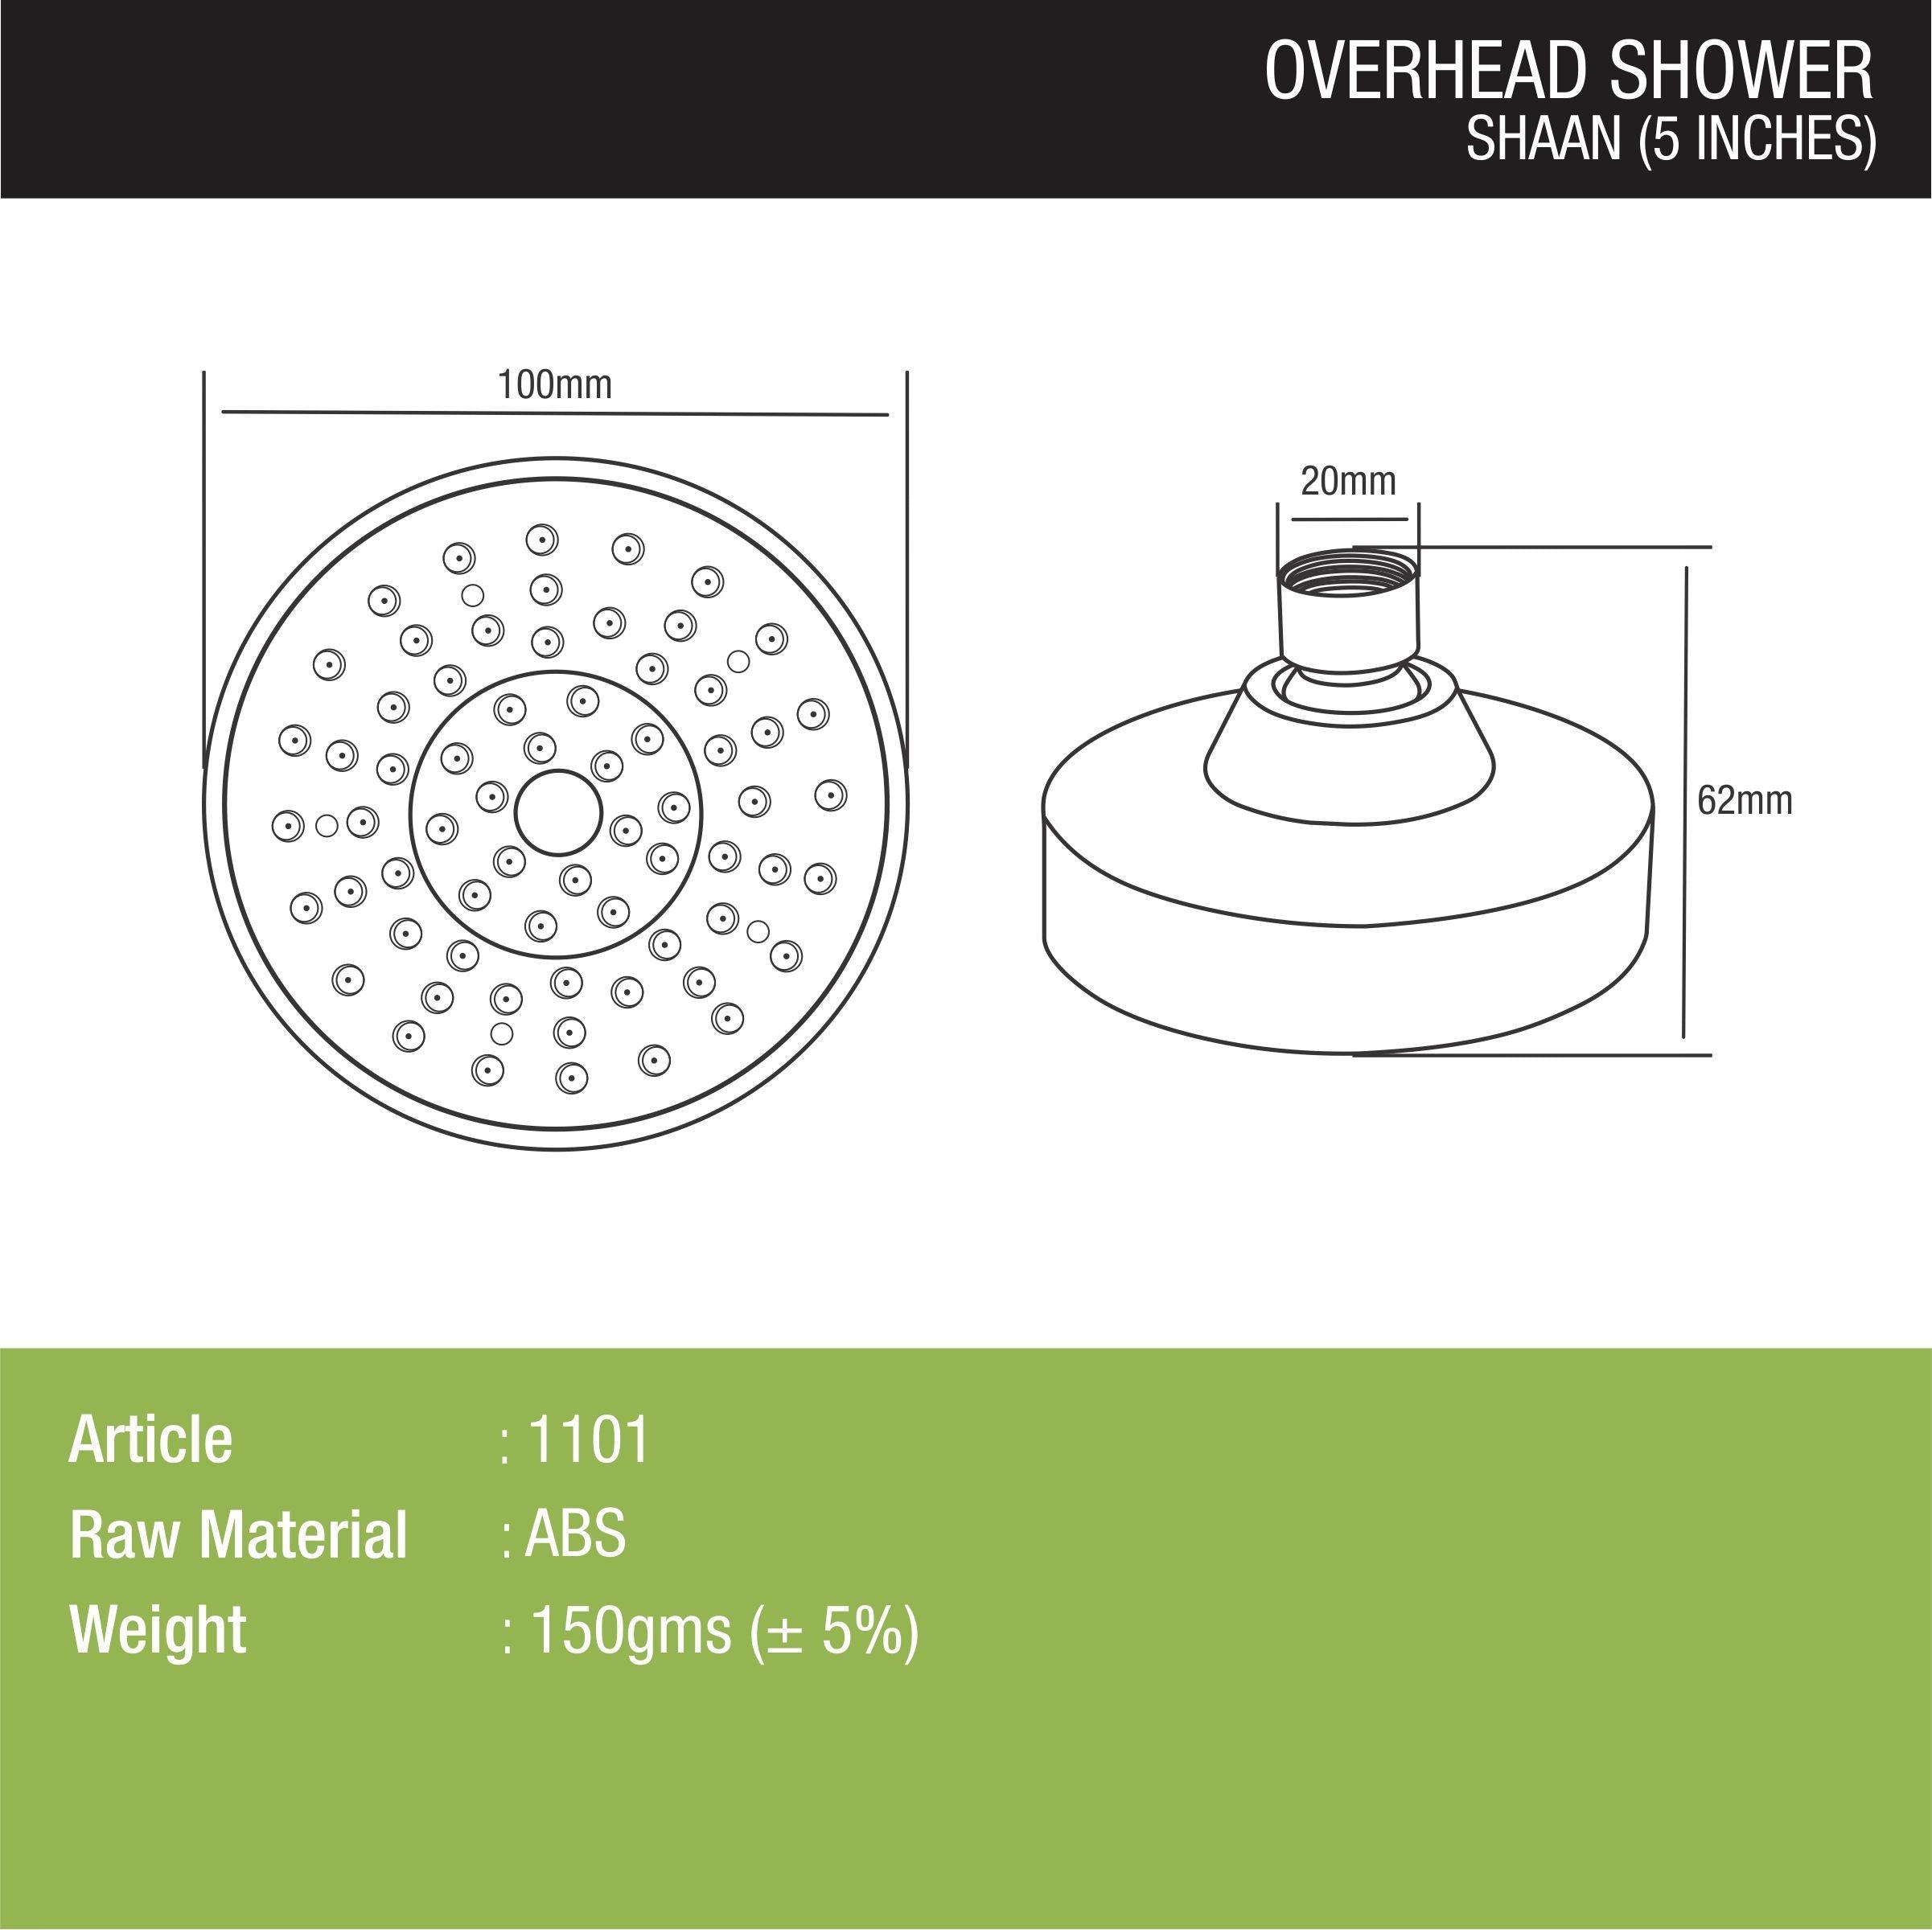 Shaan Overhead Shower (5 Inches) dimensions and sizes